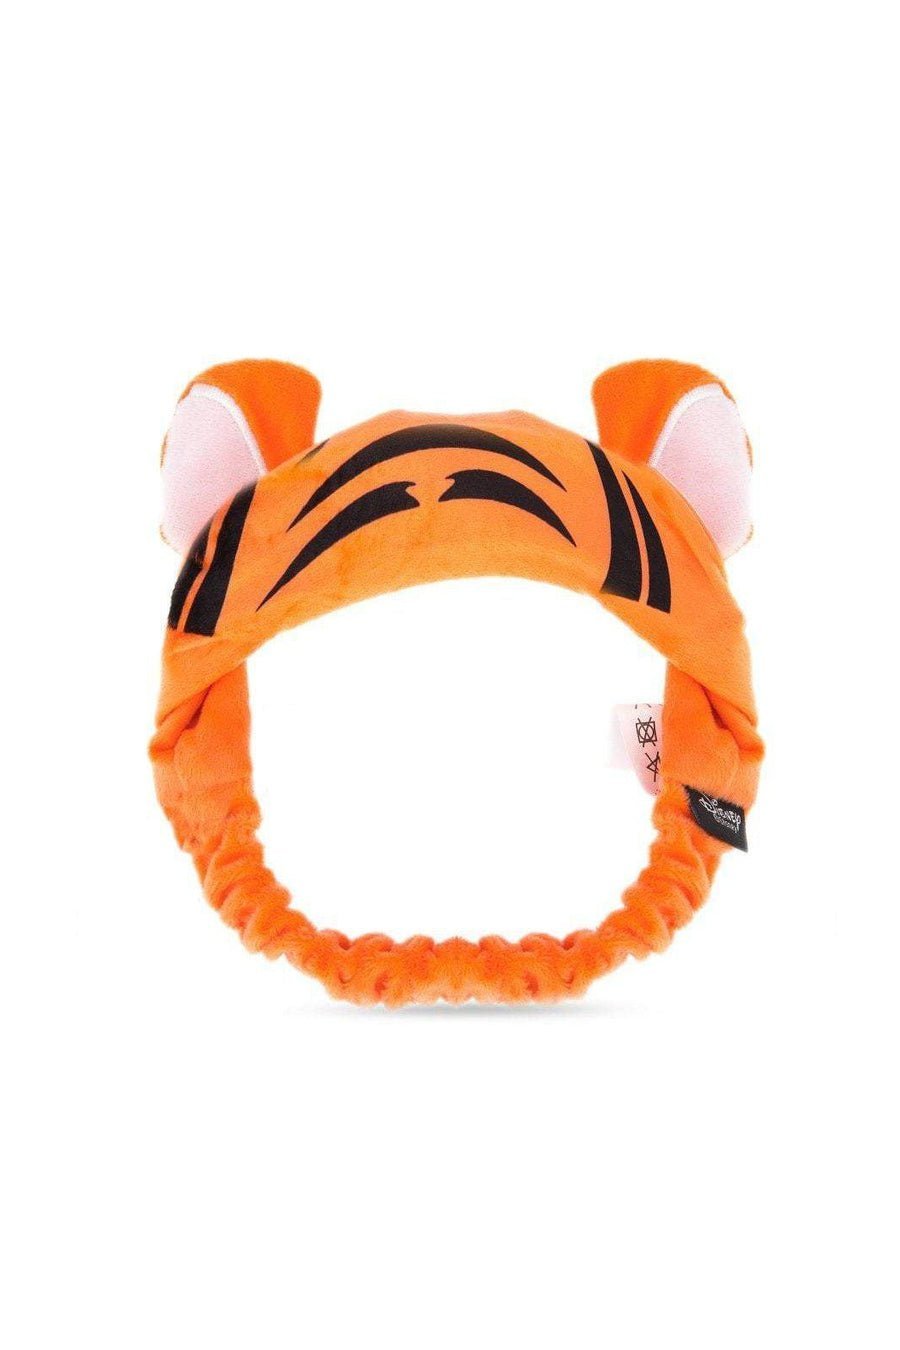 Shop Disney Winnie The Pooh Headband - Premium Beauty Kit from Mad Beauty Online now at Spoiled Brat 